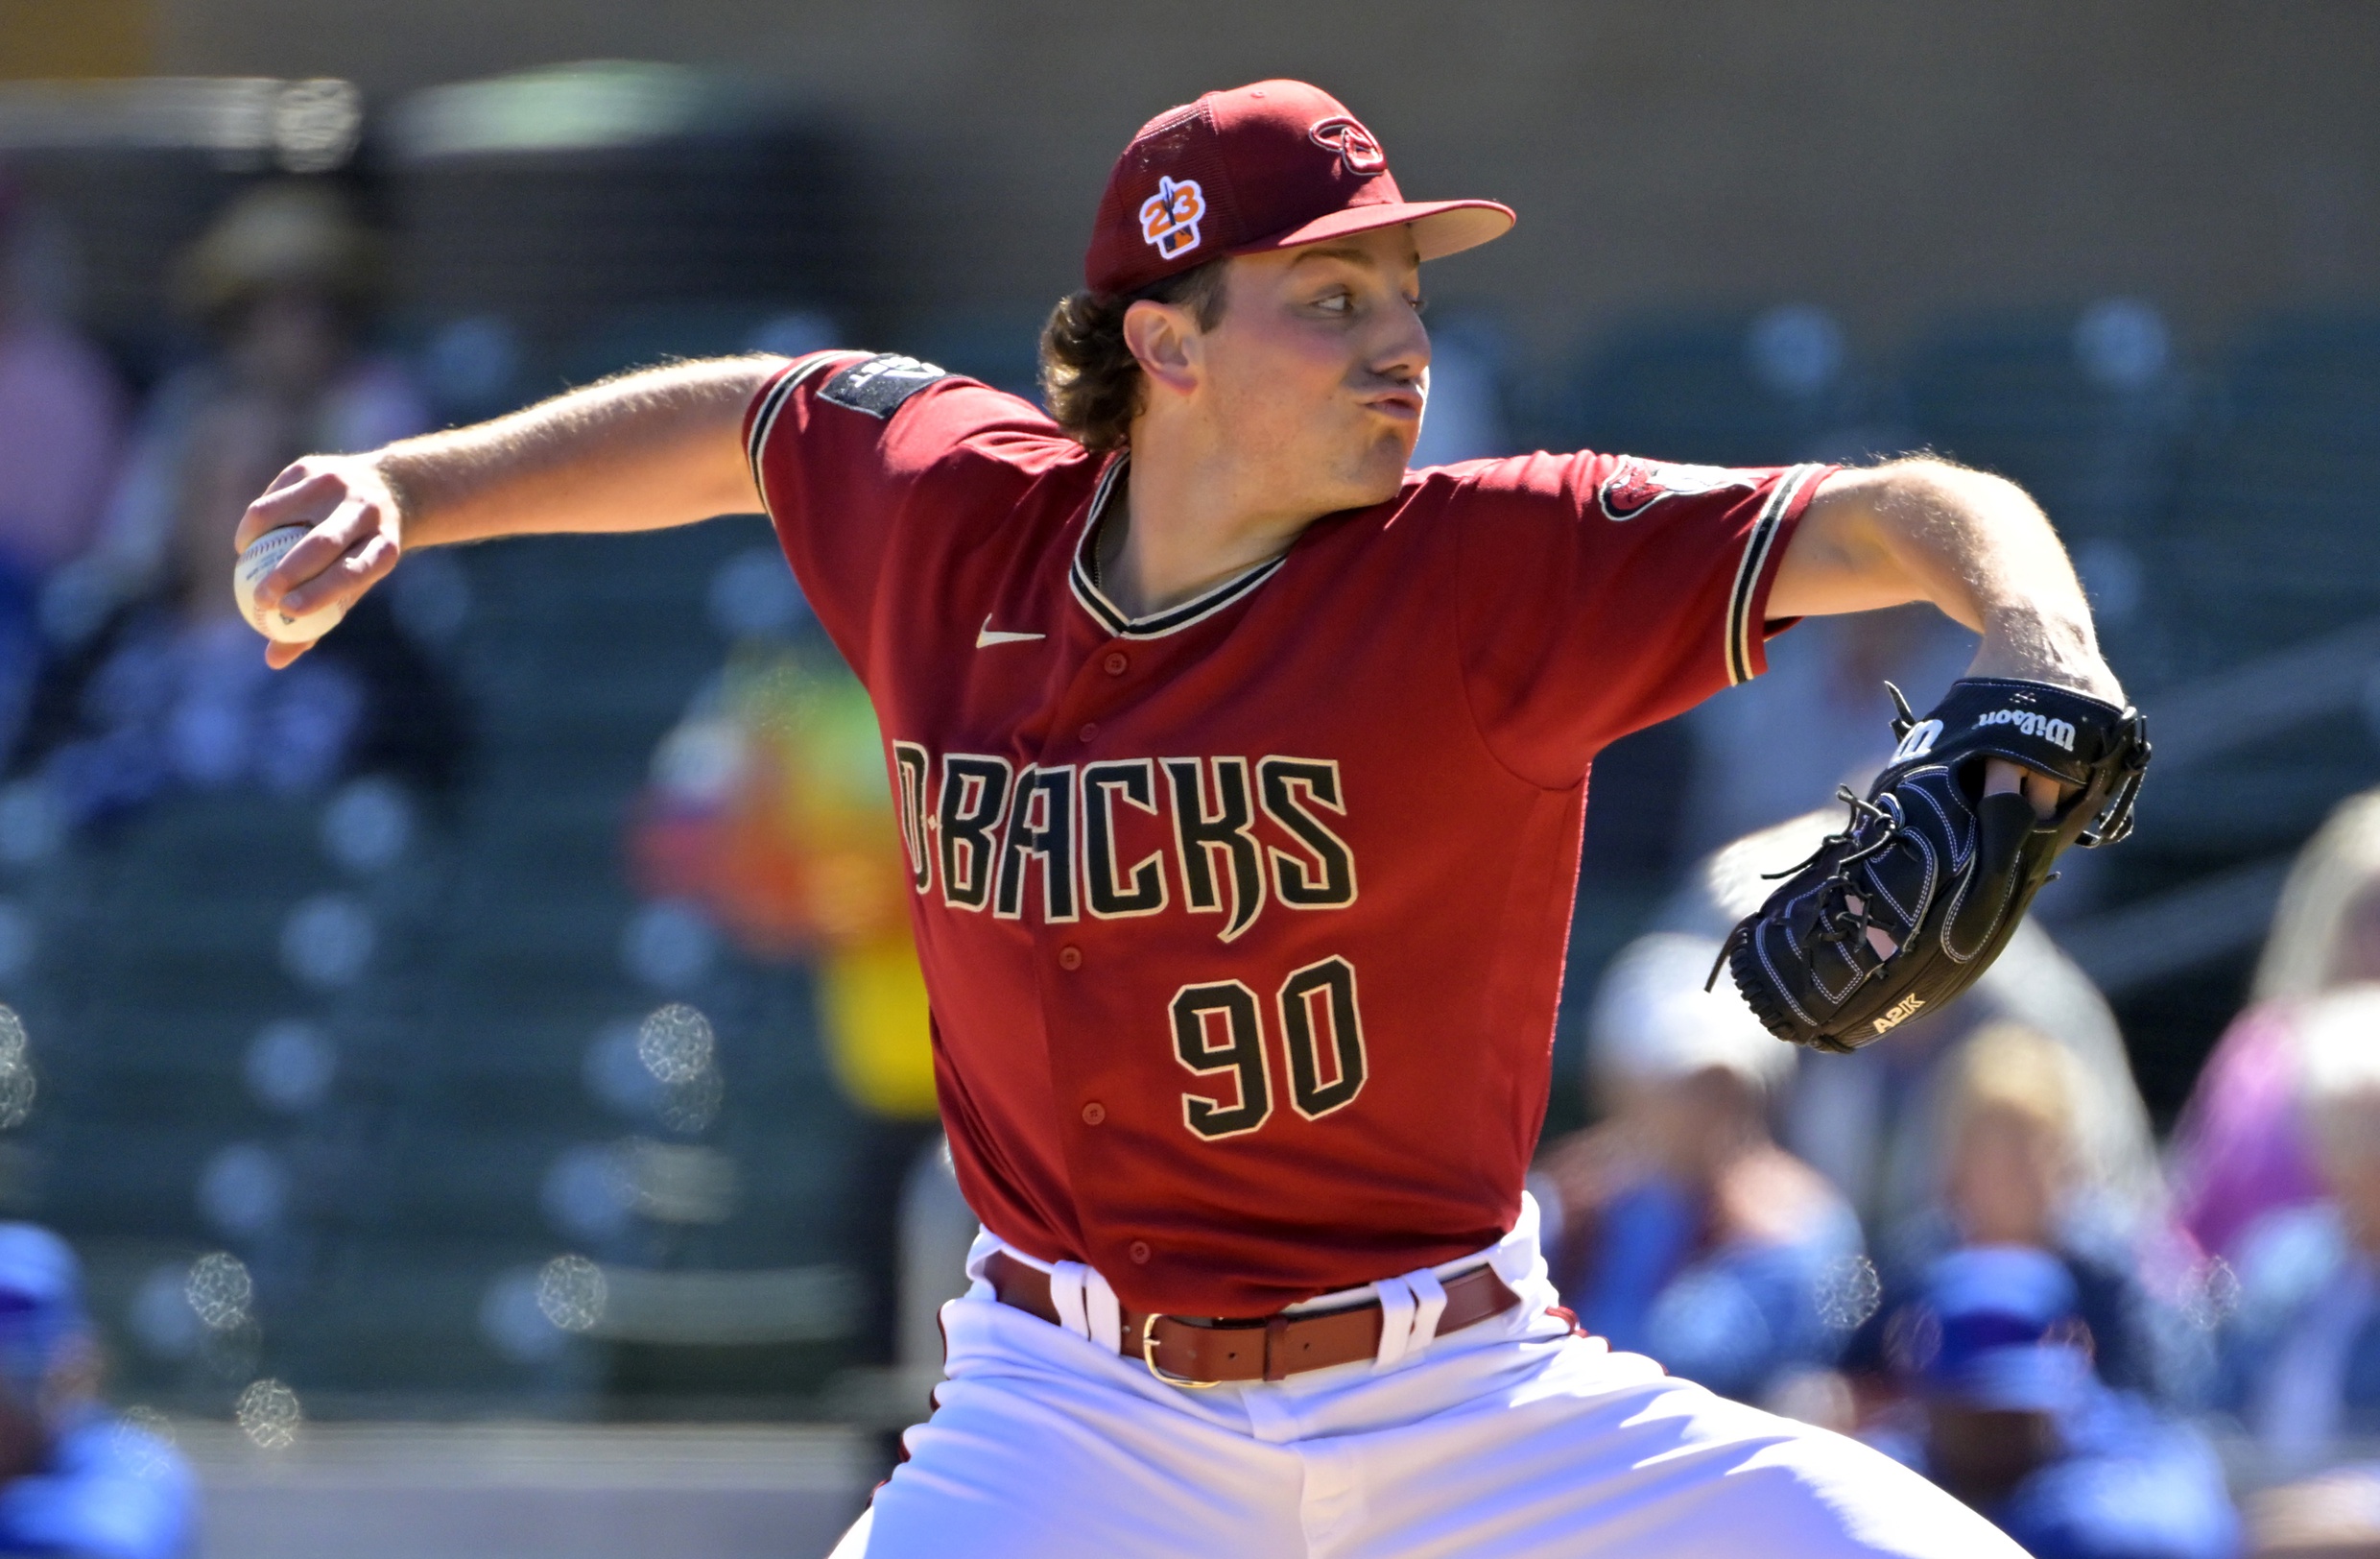 Diamondbacks pitcher Brandon Pfaadt pitches in a spring training game at Salt River Fields at Talking Stick. (Jayne Kamin-Oncea/USA TODAY Sports)